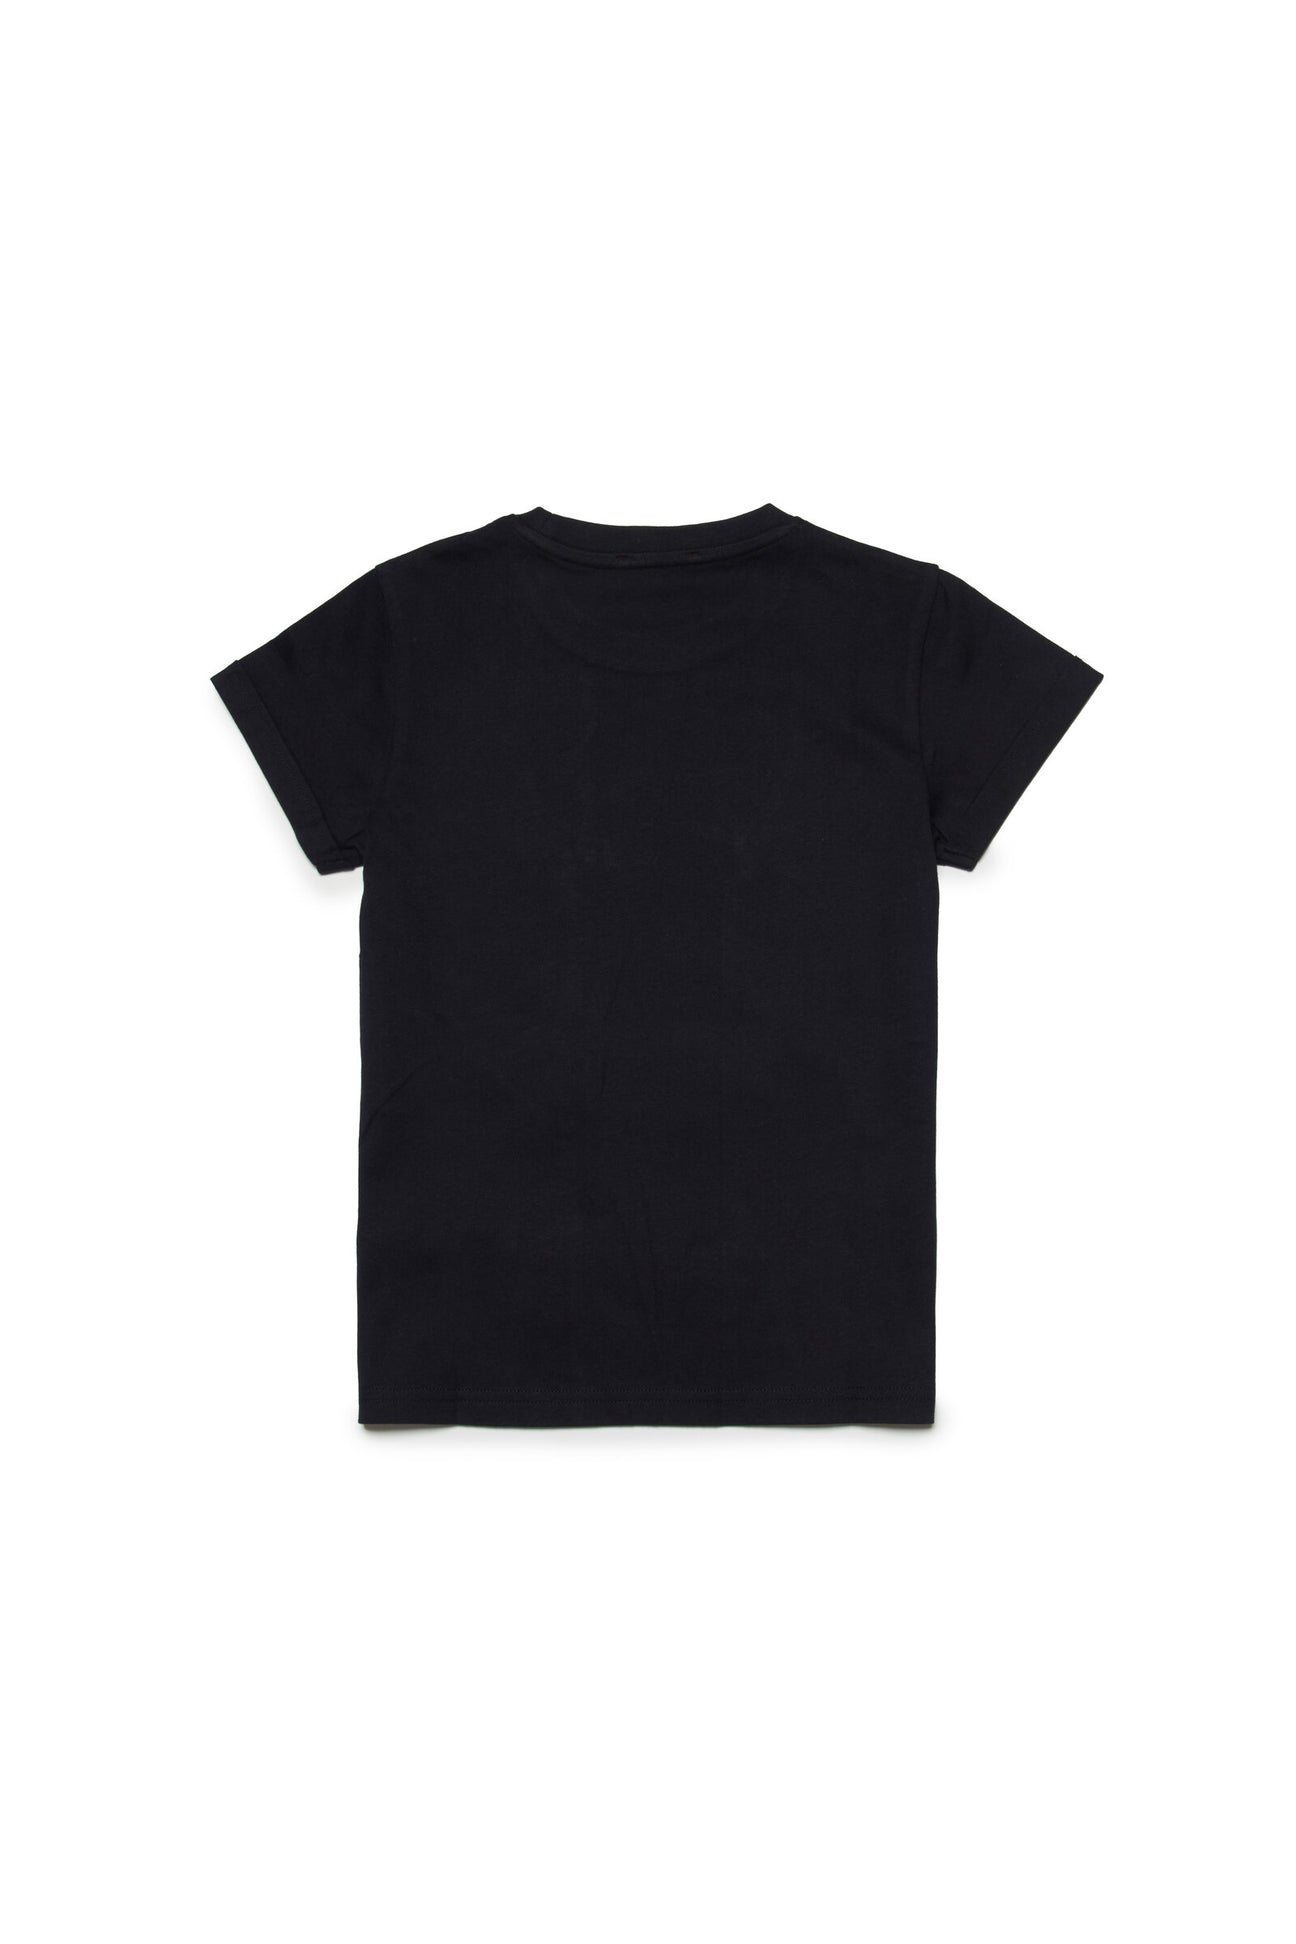 Black t-shirt with sequined Diesel logo Black t-shirt with sequined Diesel logo